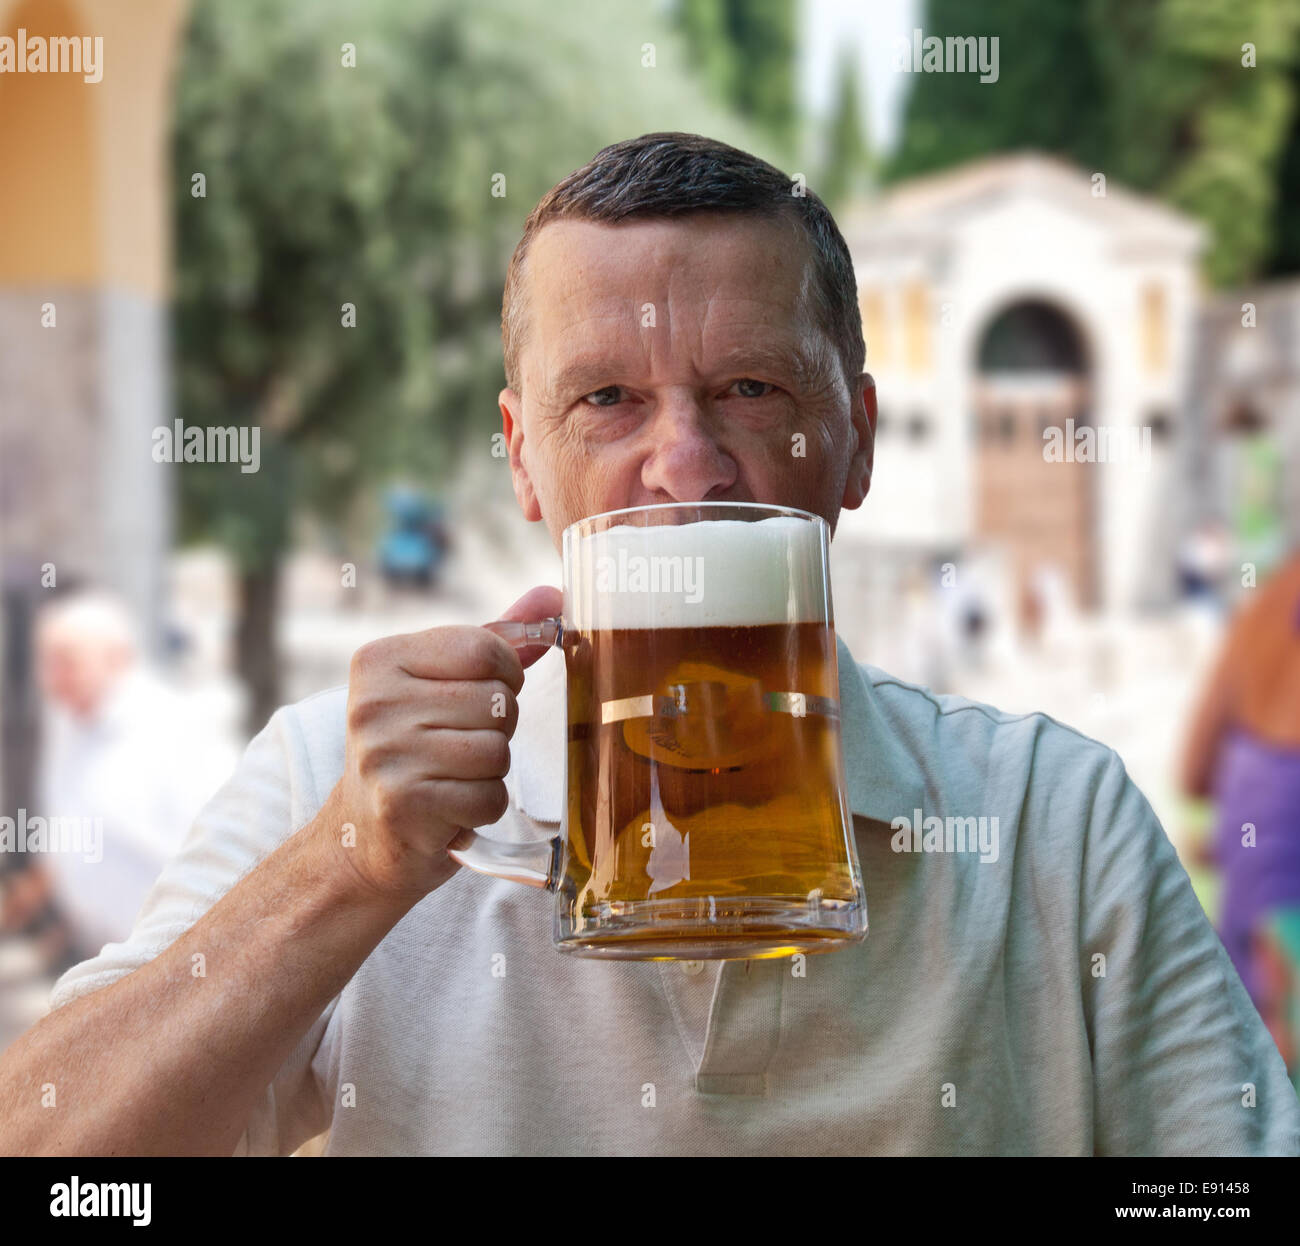 Large liter glass of beer in senior hand Stock Photo